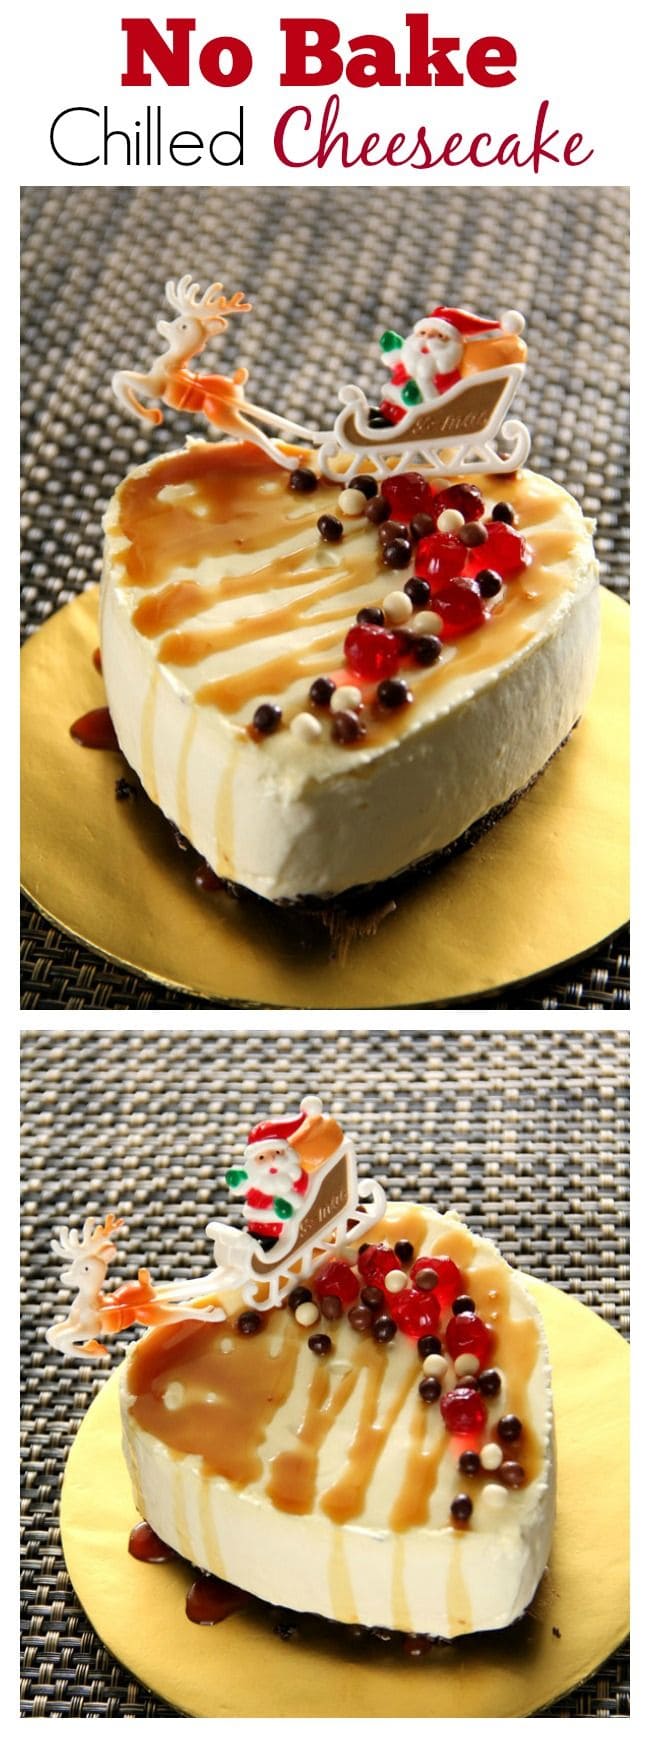 No bake chilled cheesecake – super easy chilled cheesecake made with cream cheese and whipping cream. Super creamy and sinfully delicious | rasamalaysia.com